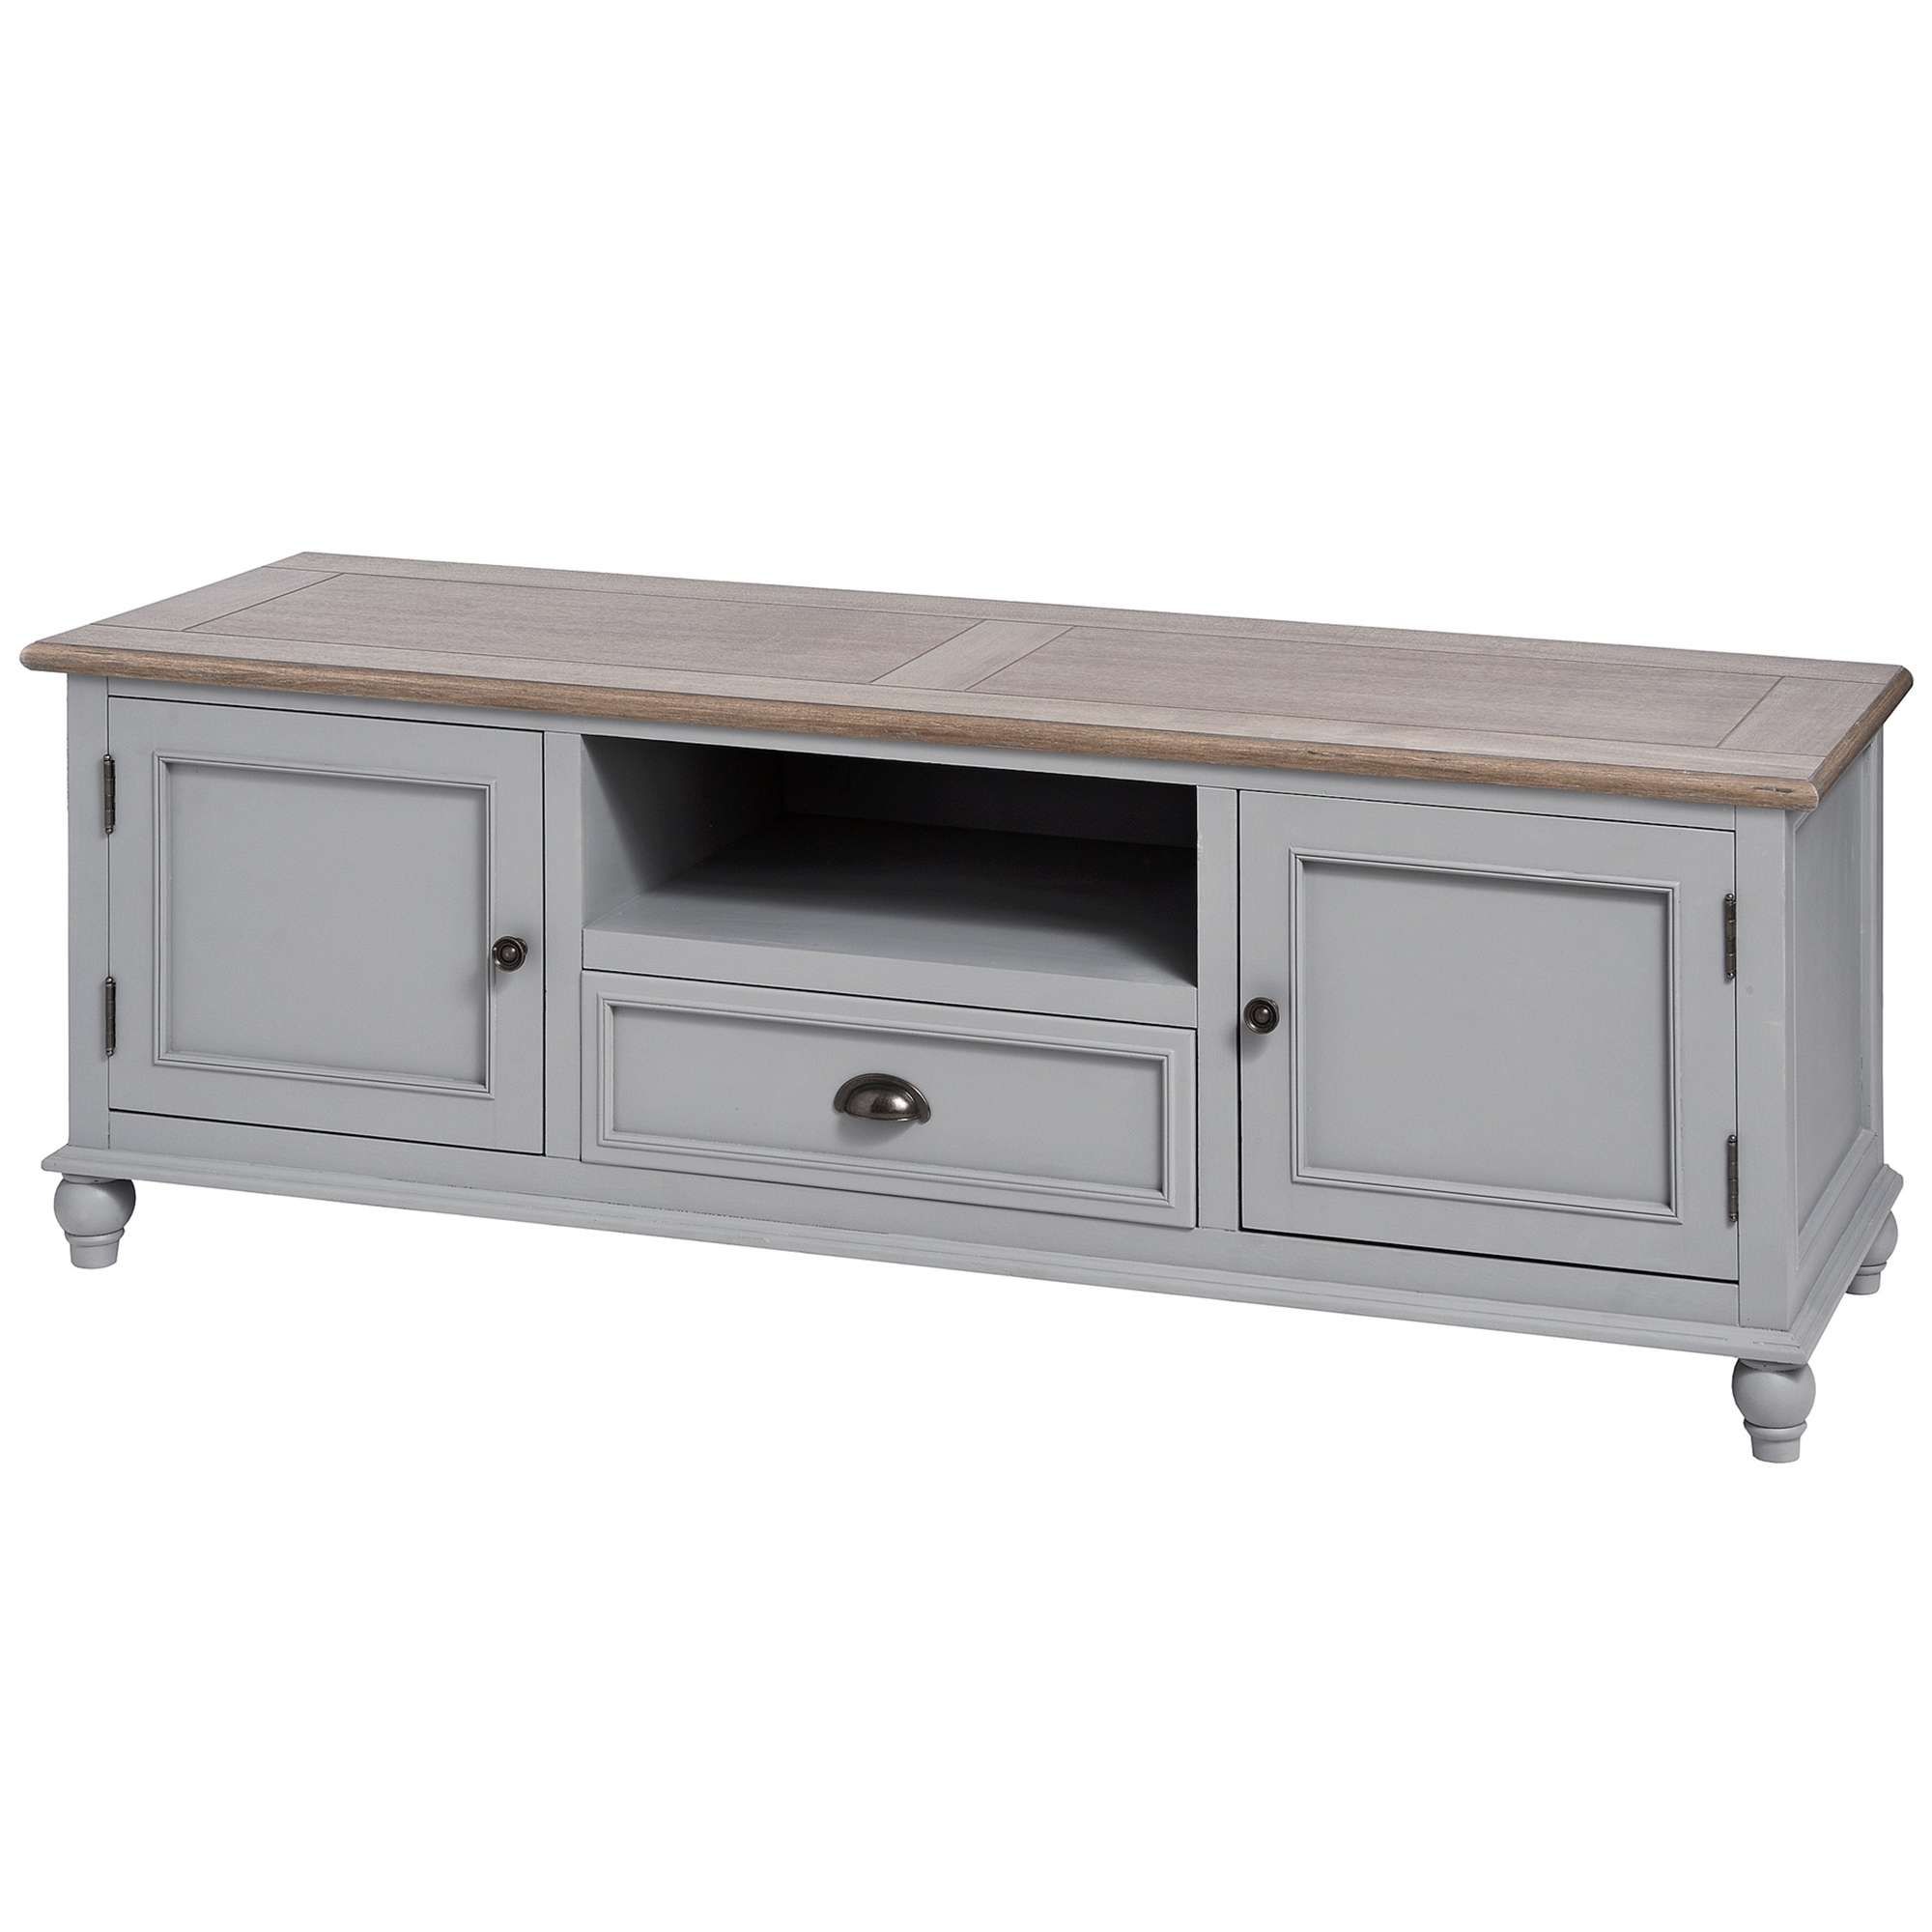 Churchill Shabby Chic Tv Cabinet | Available Now Pertaining To Shabby Chic Tv Cabinets (View 1 of 20)